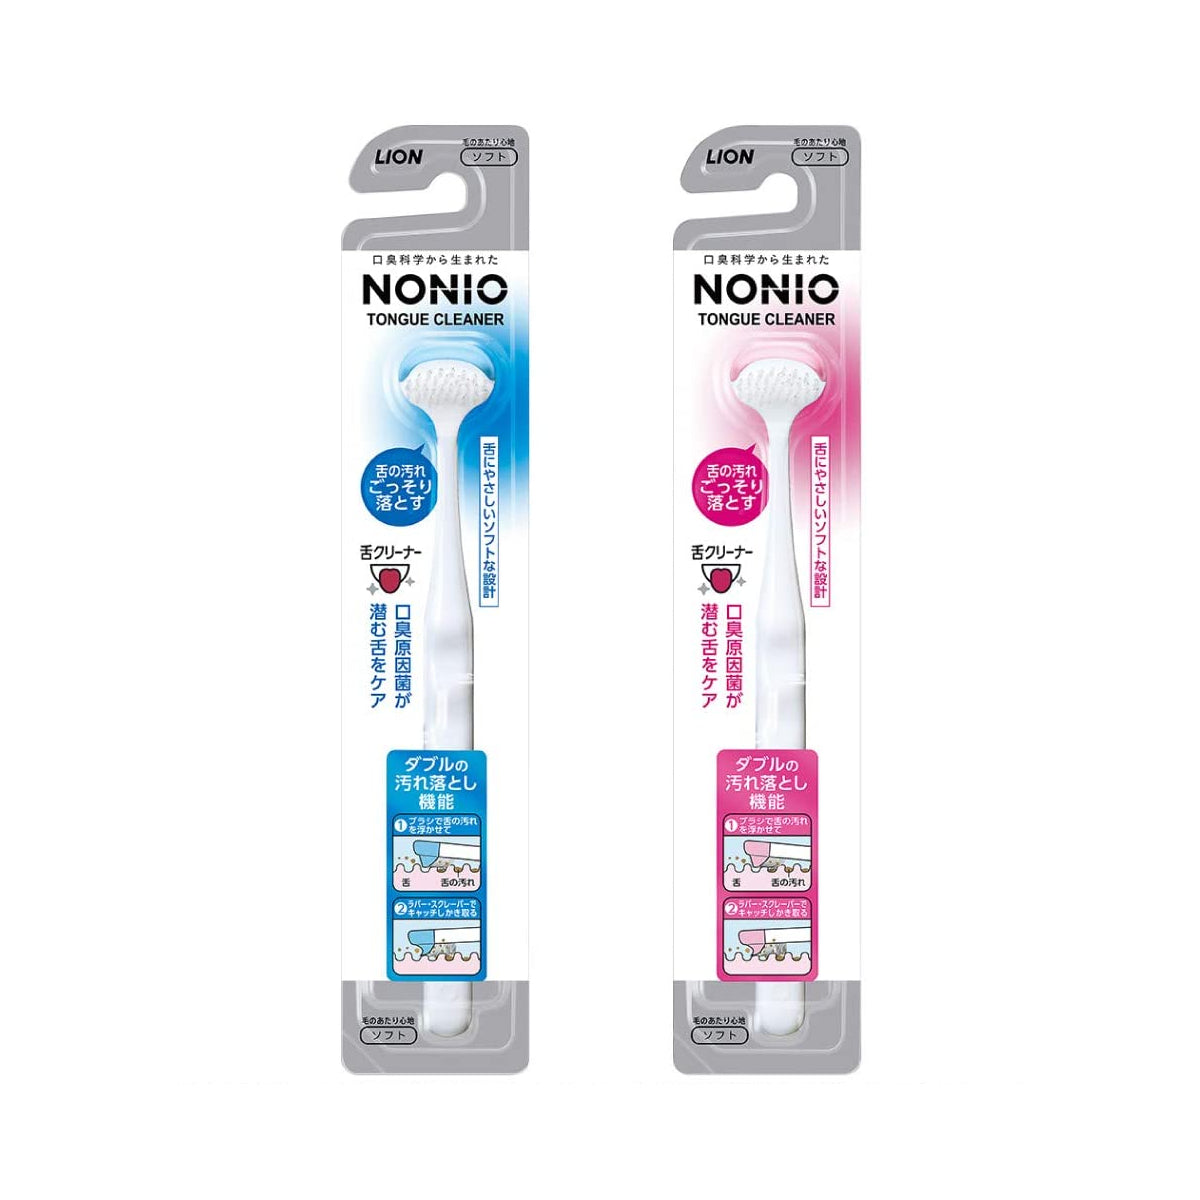 Lion Nonio Tongue Cleaner Tongue Scrapers Lion Assorted - 1 Toothbrush  